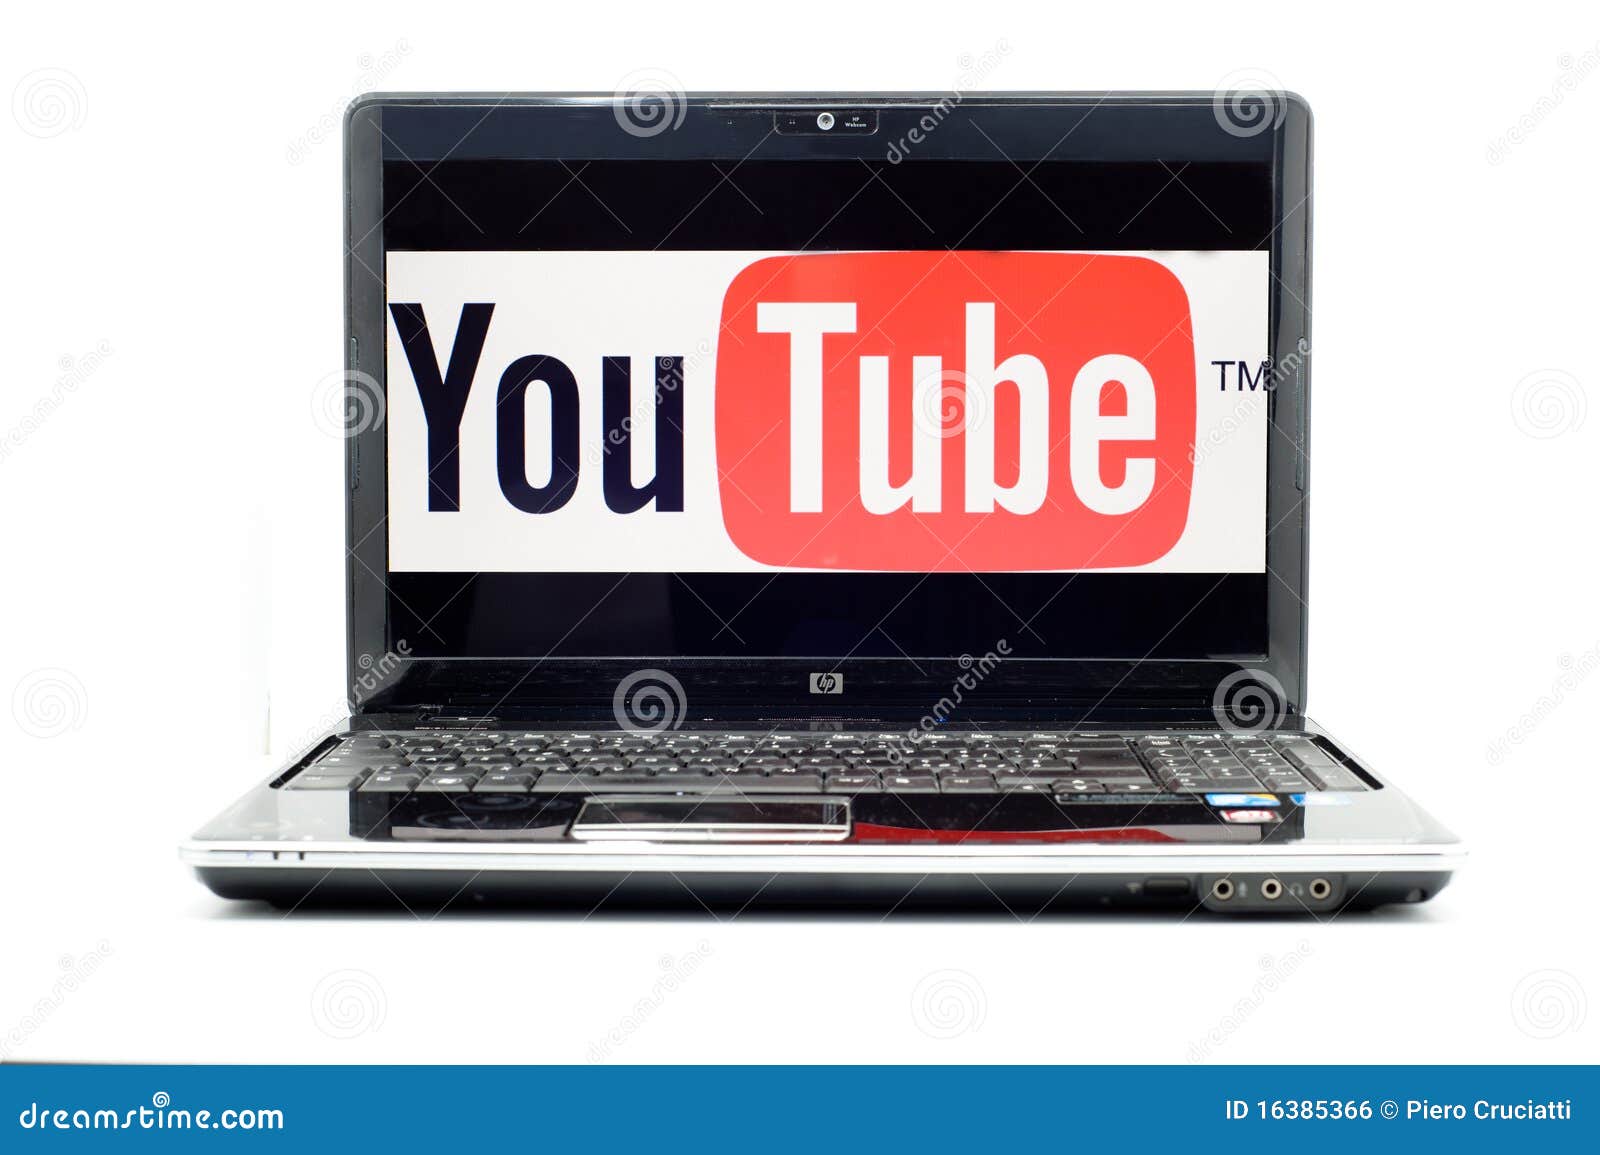 Youtube download hp